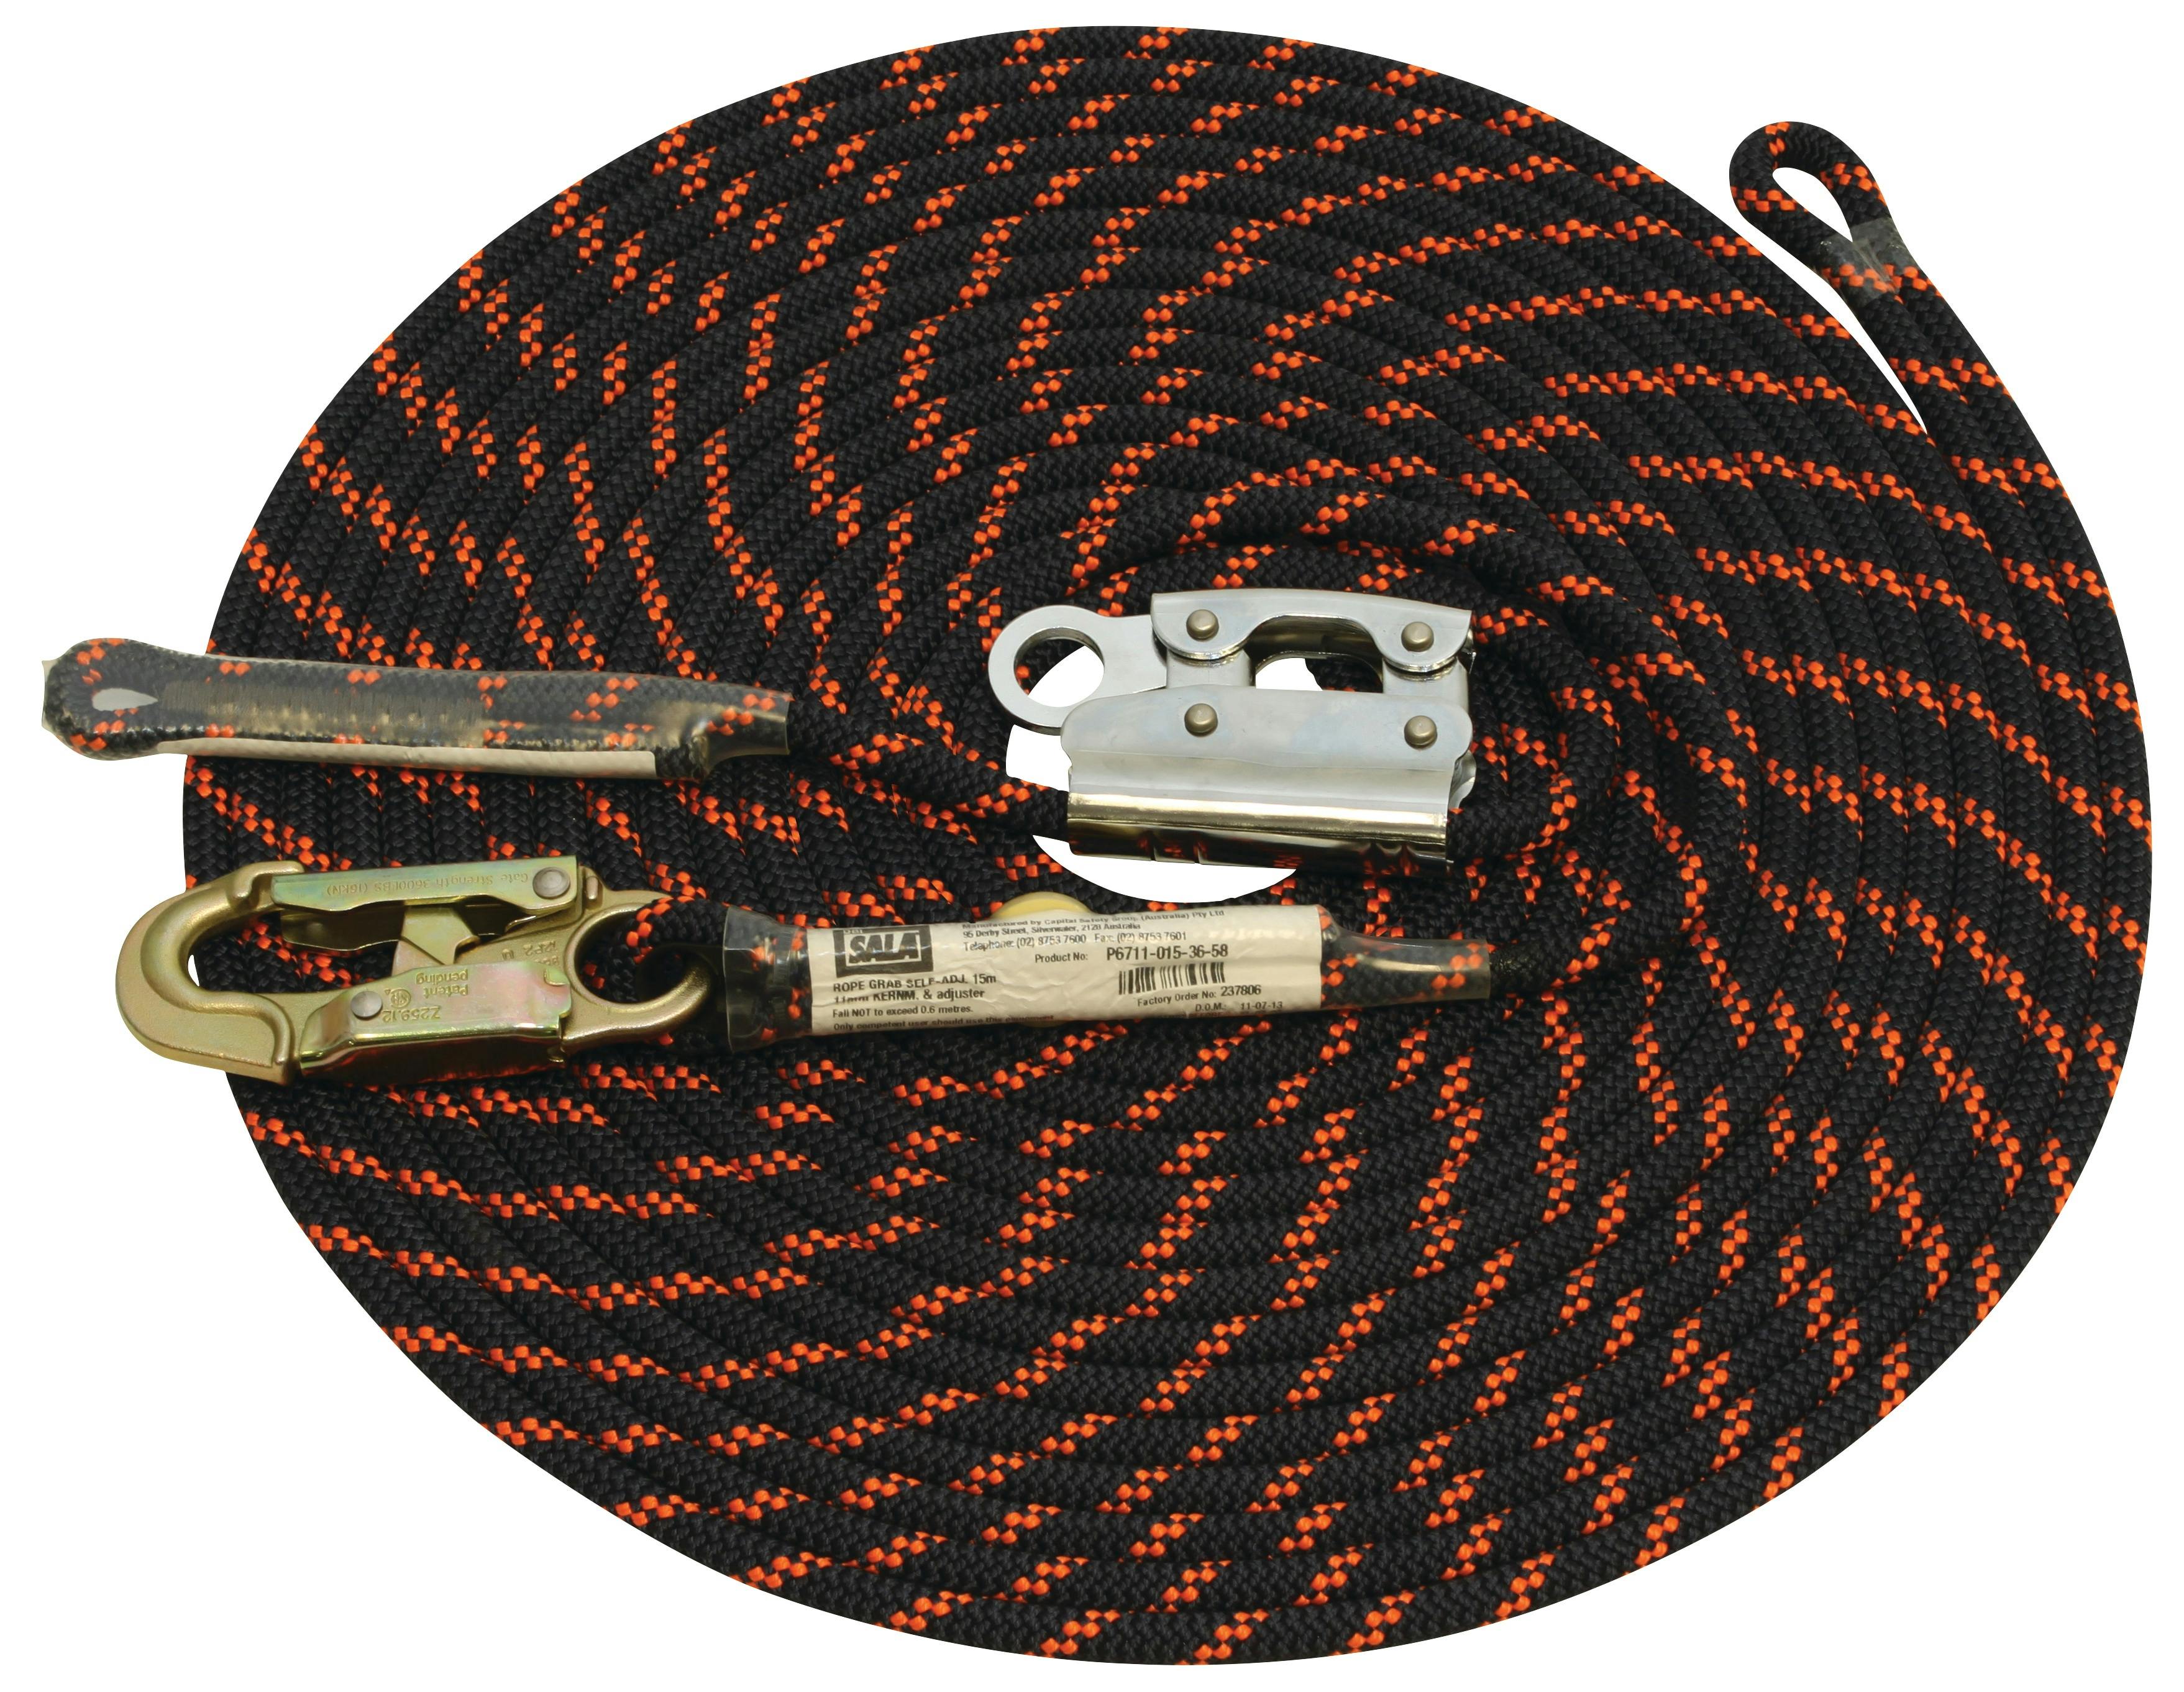 3M™ DBI-SALA® Lifeline Assembly System with integral Rope Grab P6711-040-36-58, 40m, 1 EA/Case